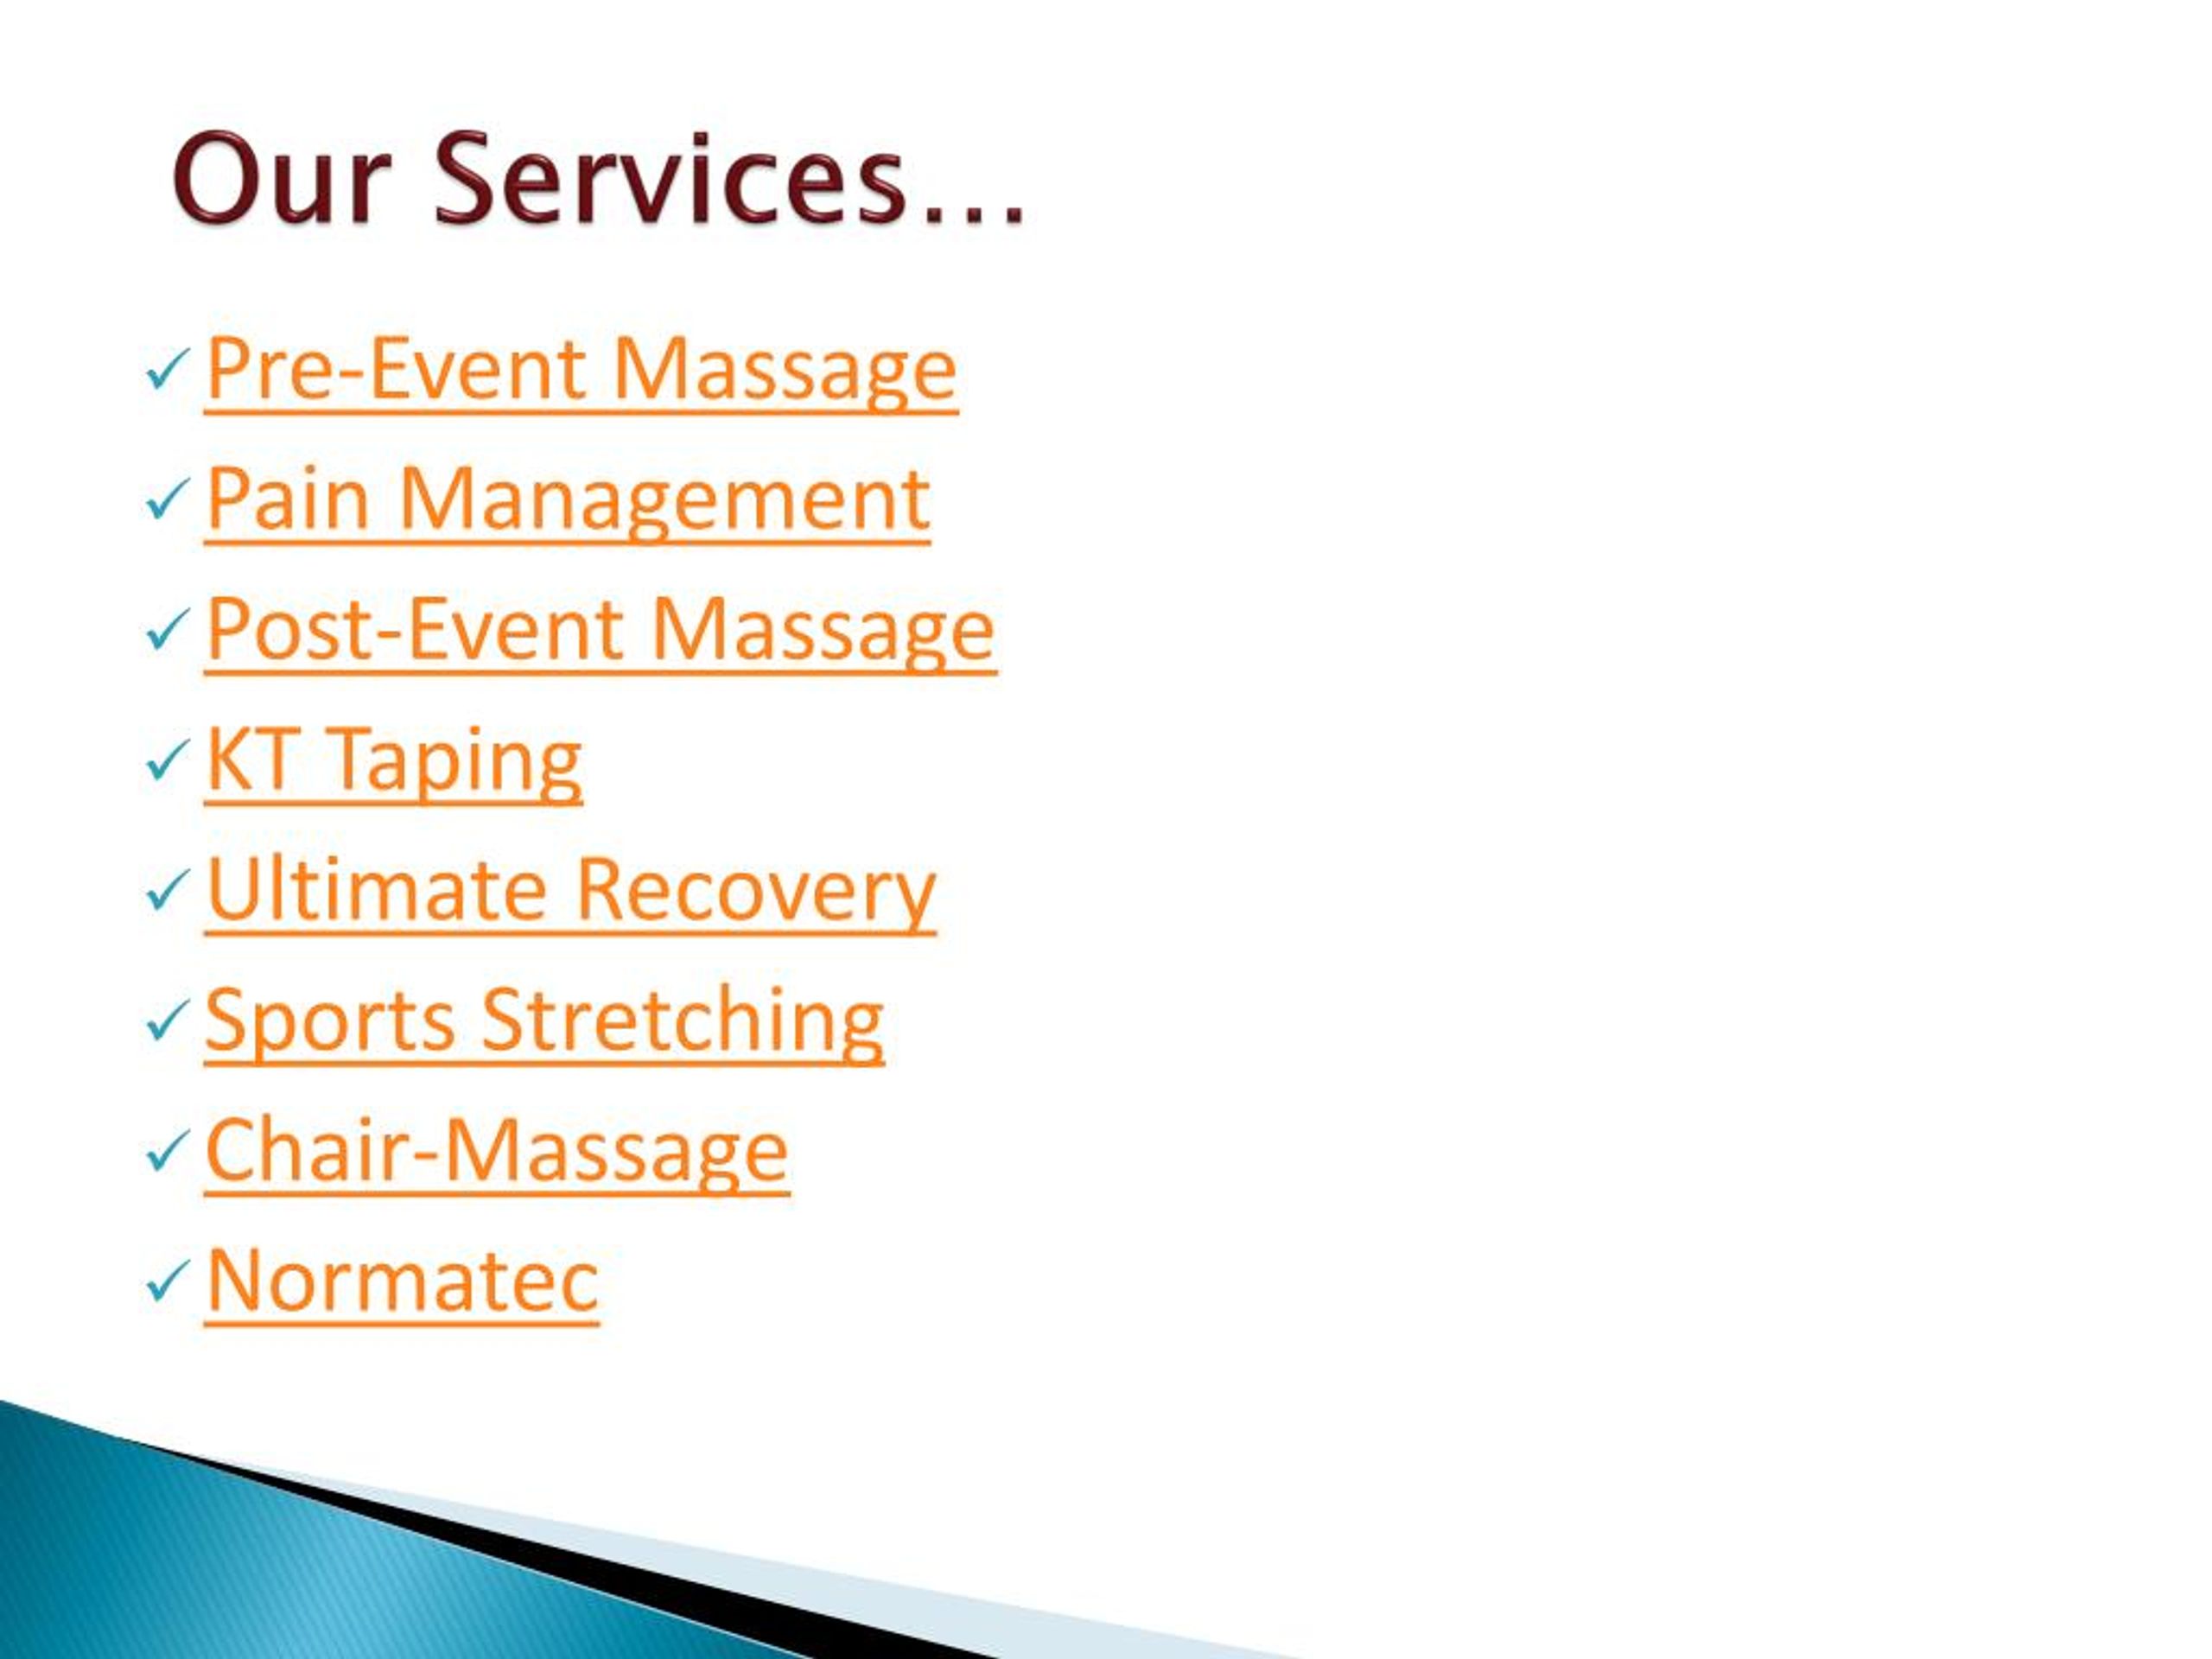 Ppt Perform Athletic Recovery Center Massage Therapy Sports Massage Powerpoint